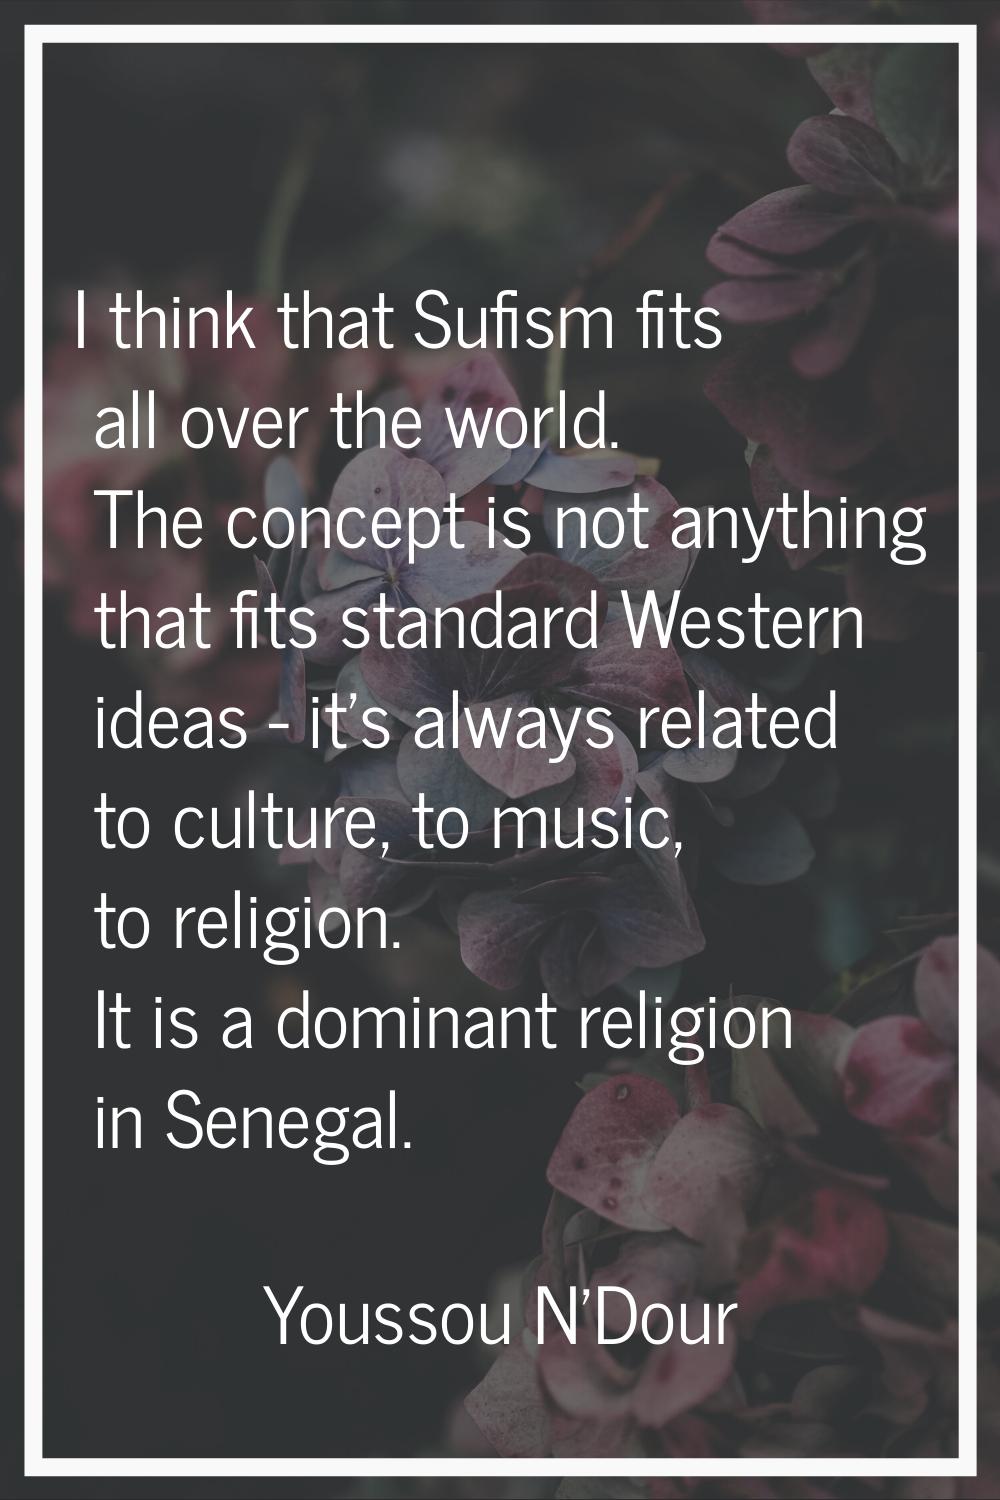 I think that Sufism fits all over the world. The concept is not anything that fits standard Western